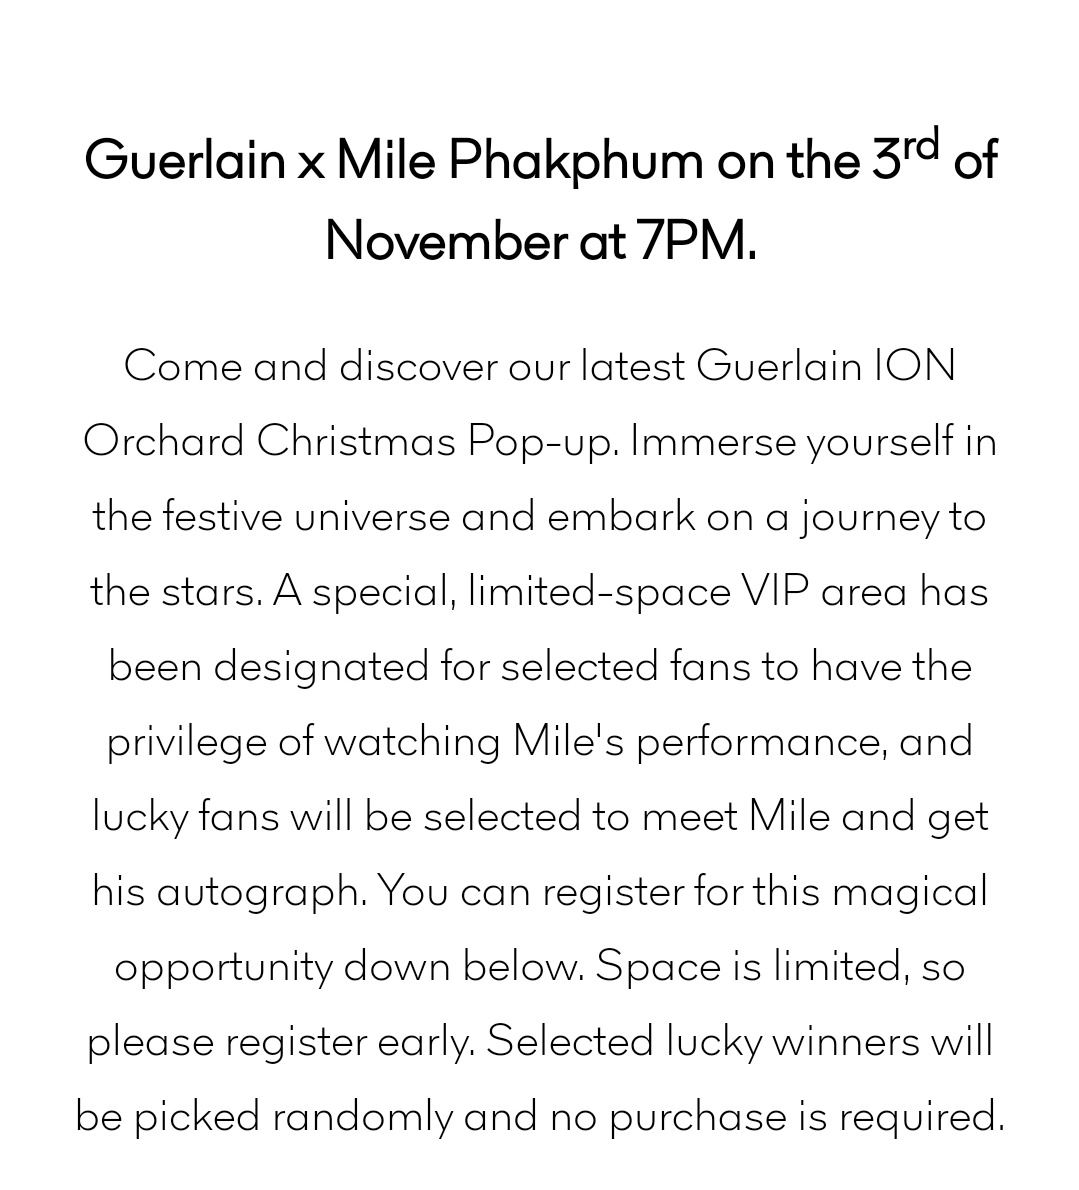 Guerlain x Mile Phakphum 💚 @milephakphum

Come and discover thelatest Guerlain ION Orchard Christmas Pop-up. A special, limited-space VIP area has been designated for selected fans to have the privilege of watching Mile's performance, and lucky fans will be selected to meet Mile